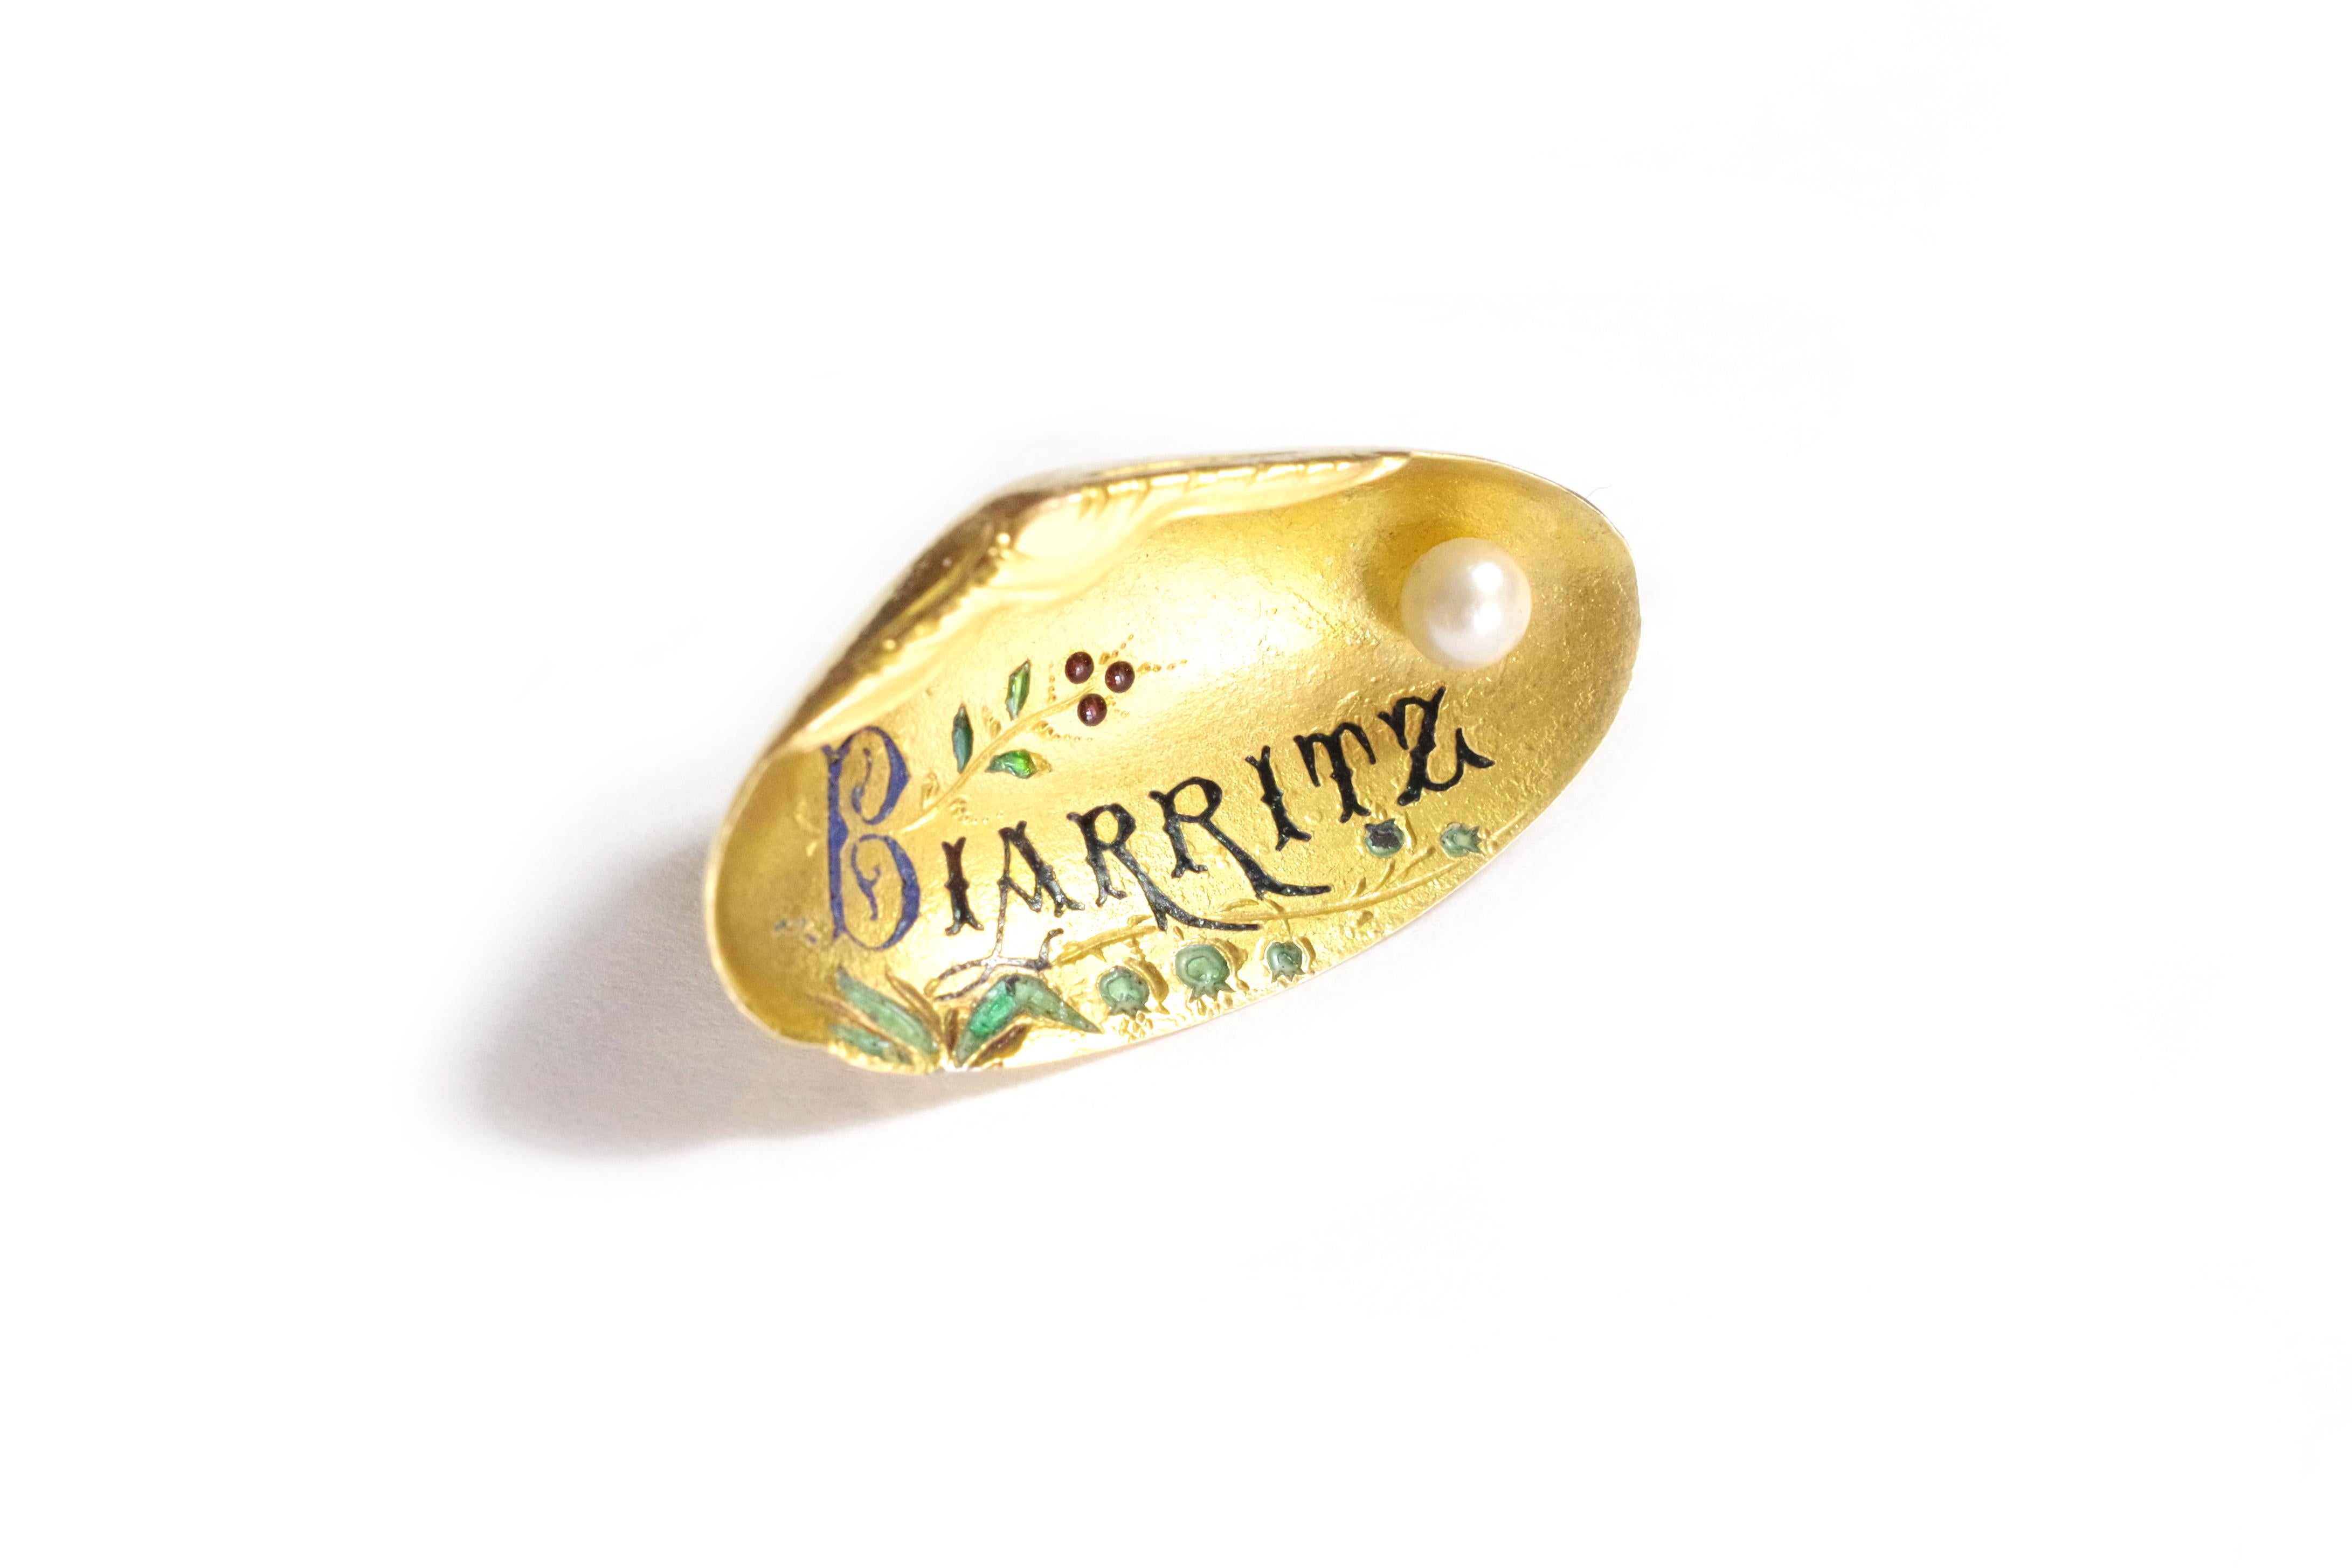 Biarritz Art Nouveau brooch in yellow gold, 18 karat. The brooch takes the form of a shell (a mussel) on which it is written 